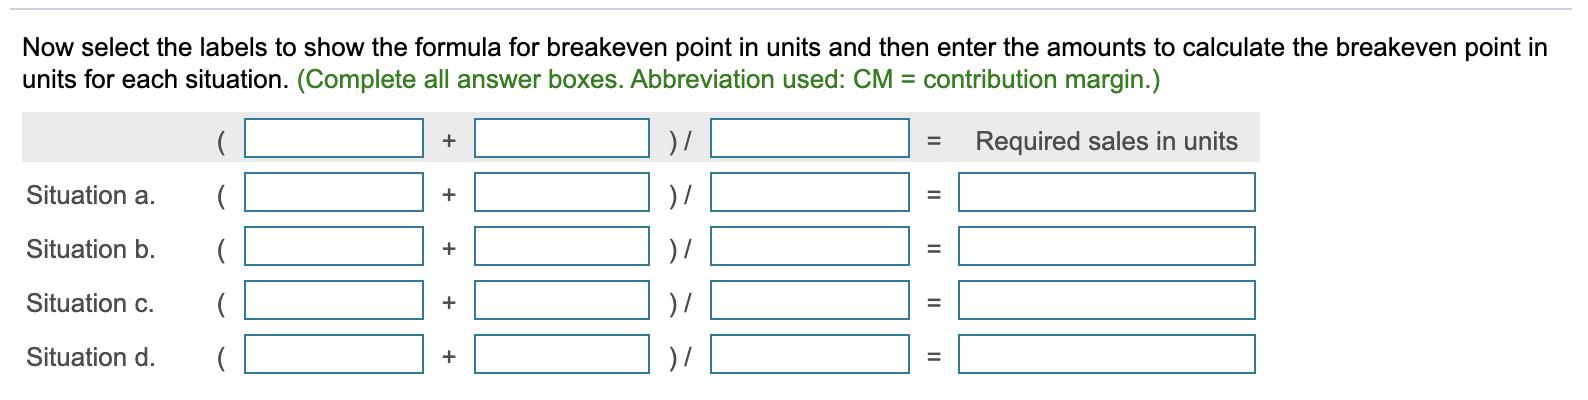 Now select the labels to show the formula for breakeven point in units and then enter the amounts to calculate the breakeven